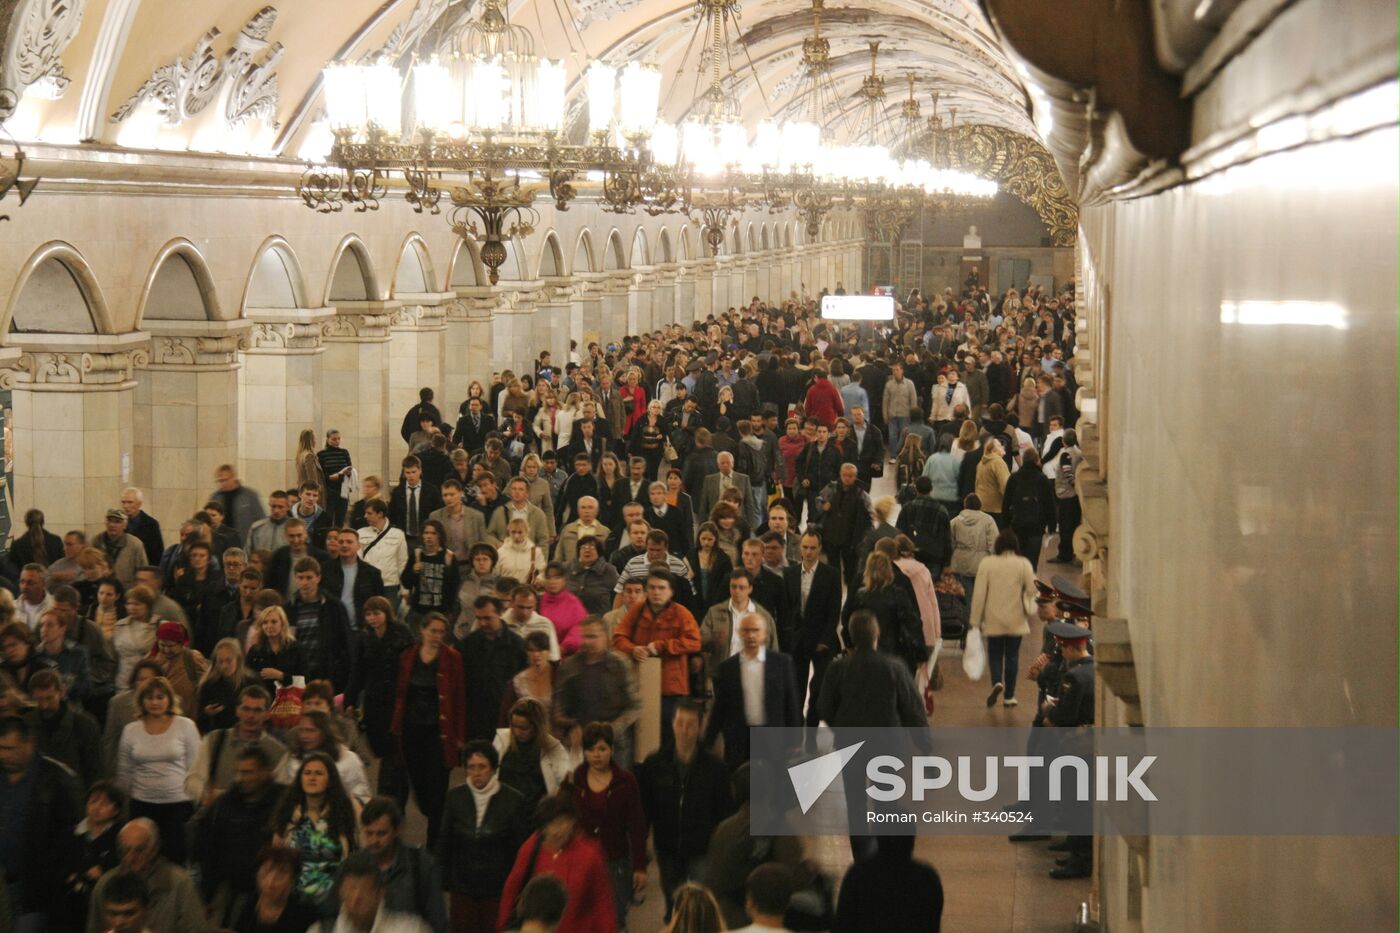 Moscow subway